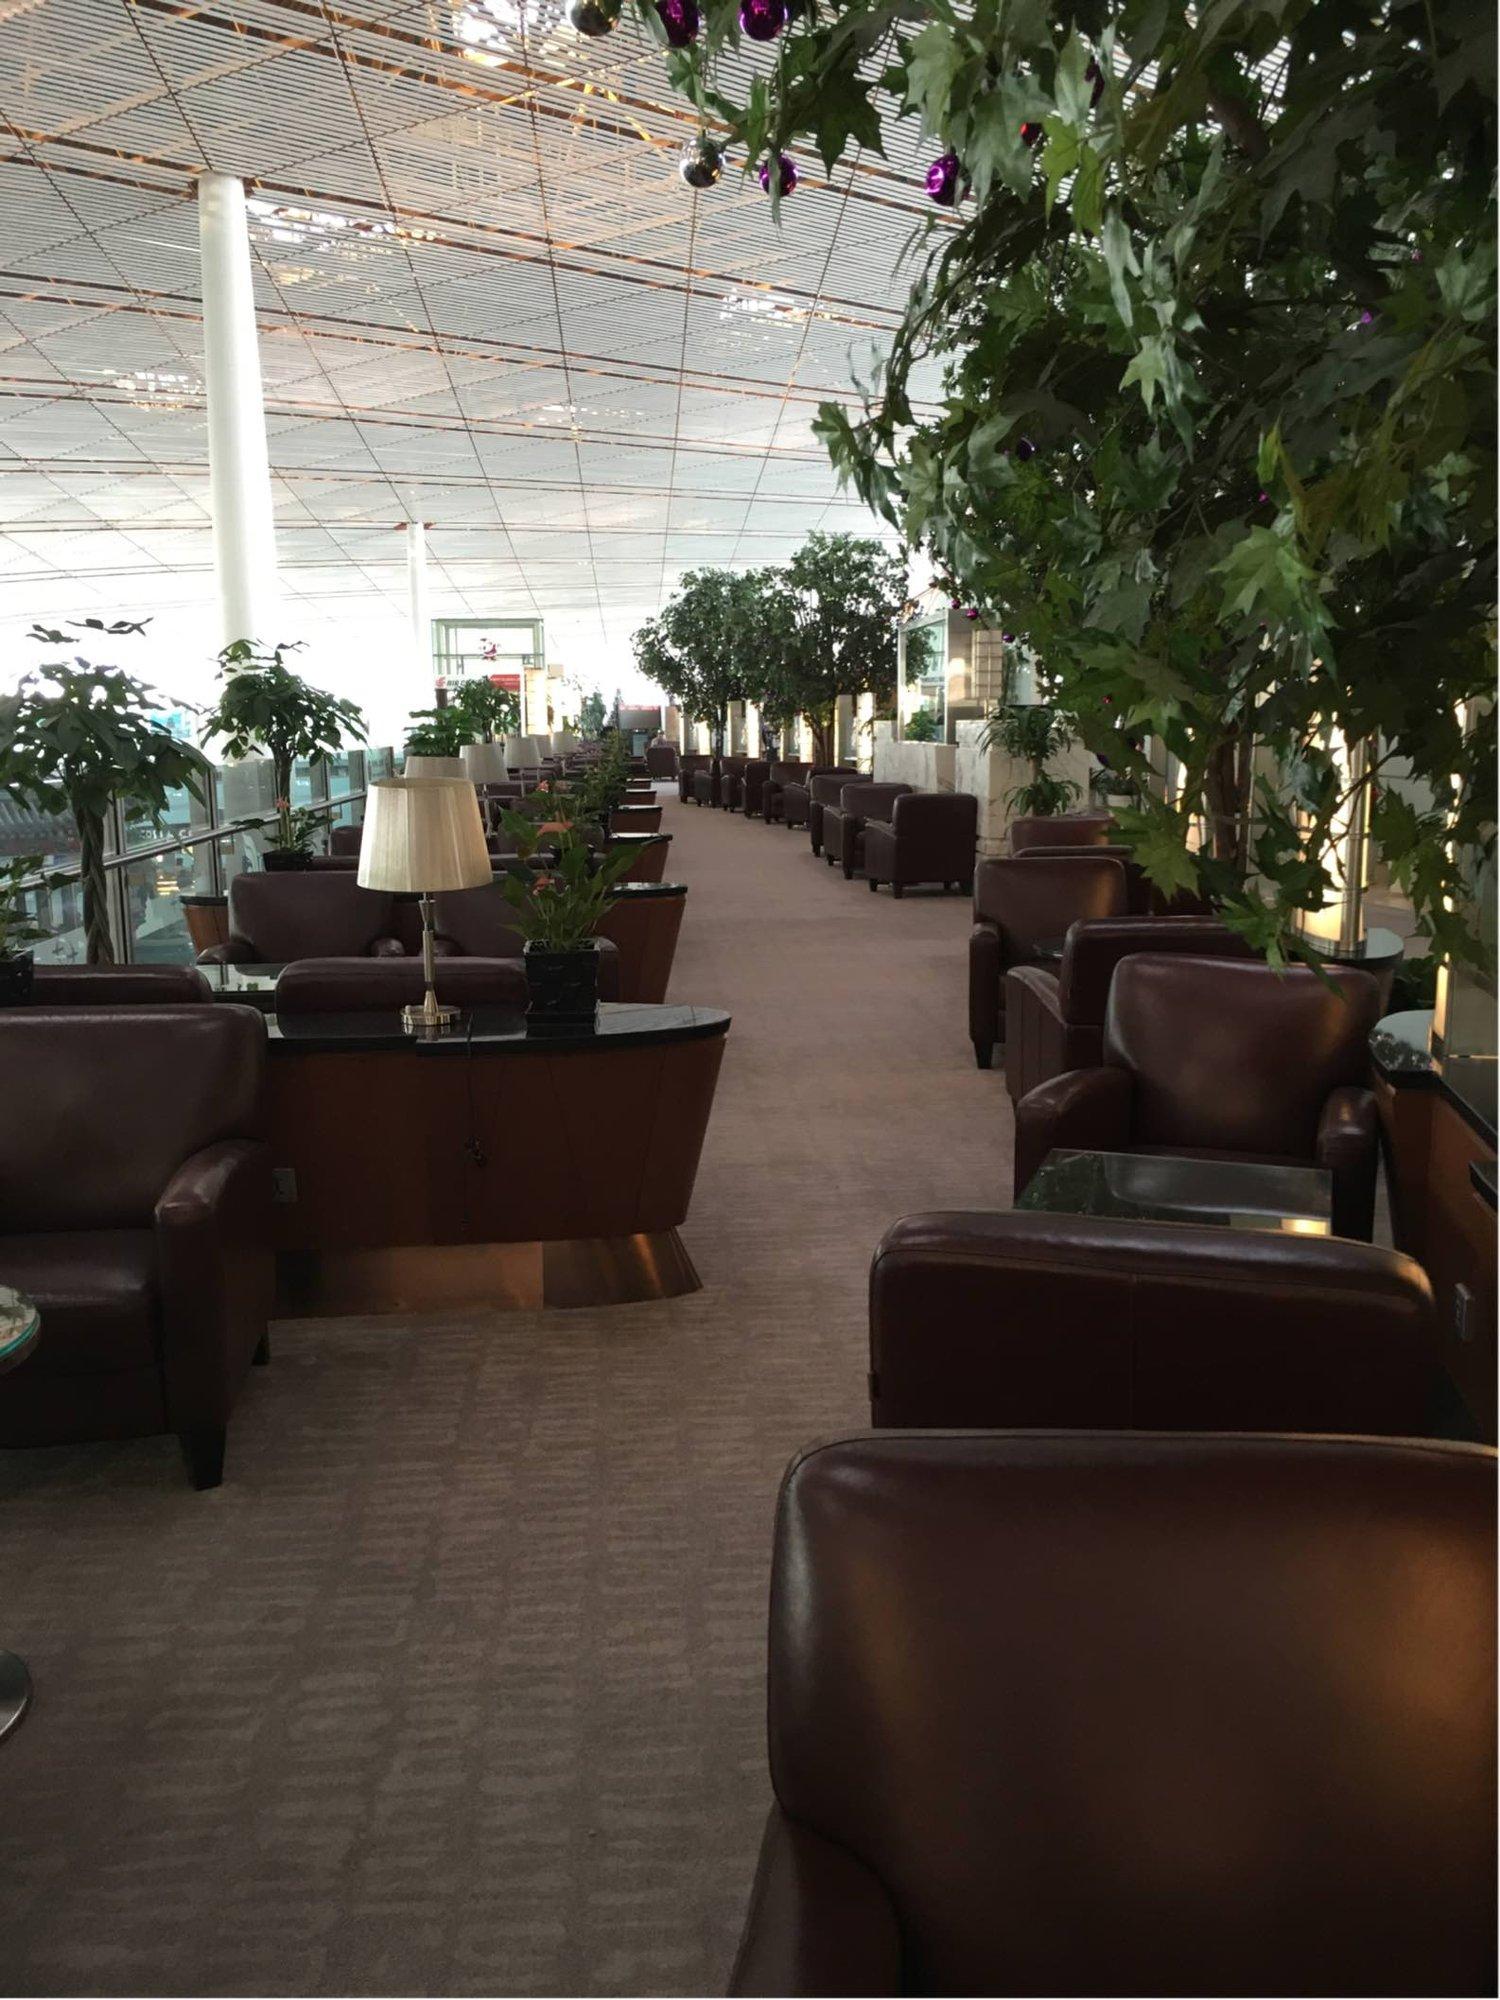 Air China International First Class Lounge image 22 of 38